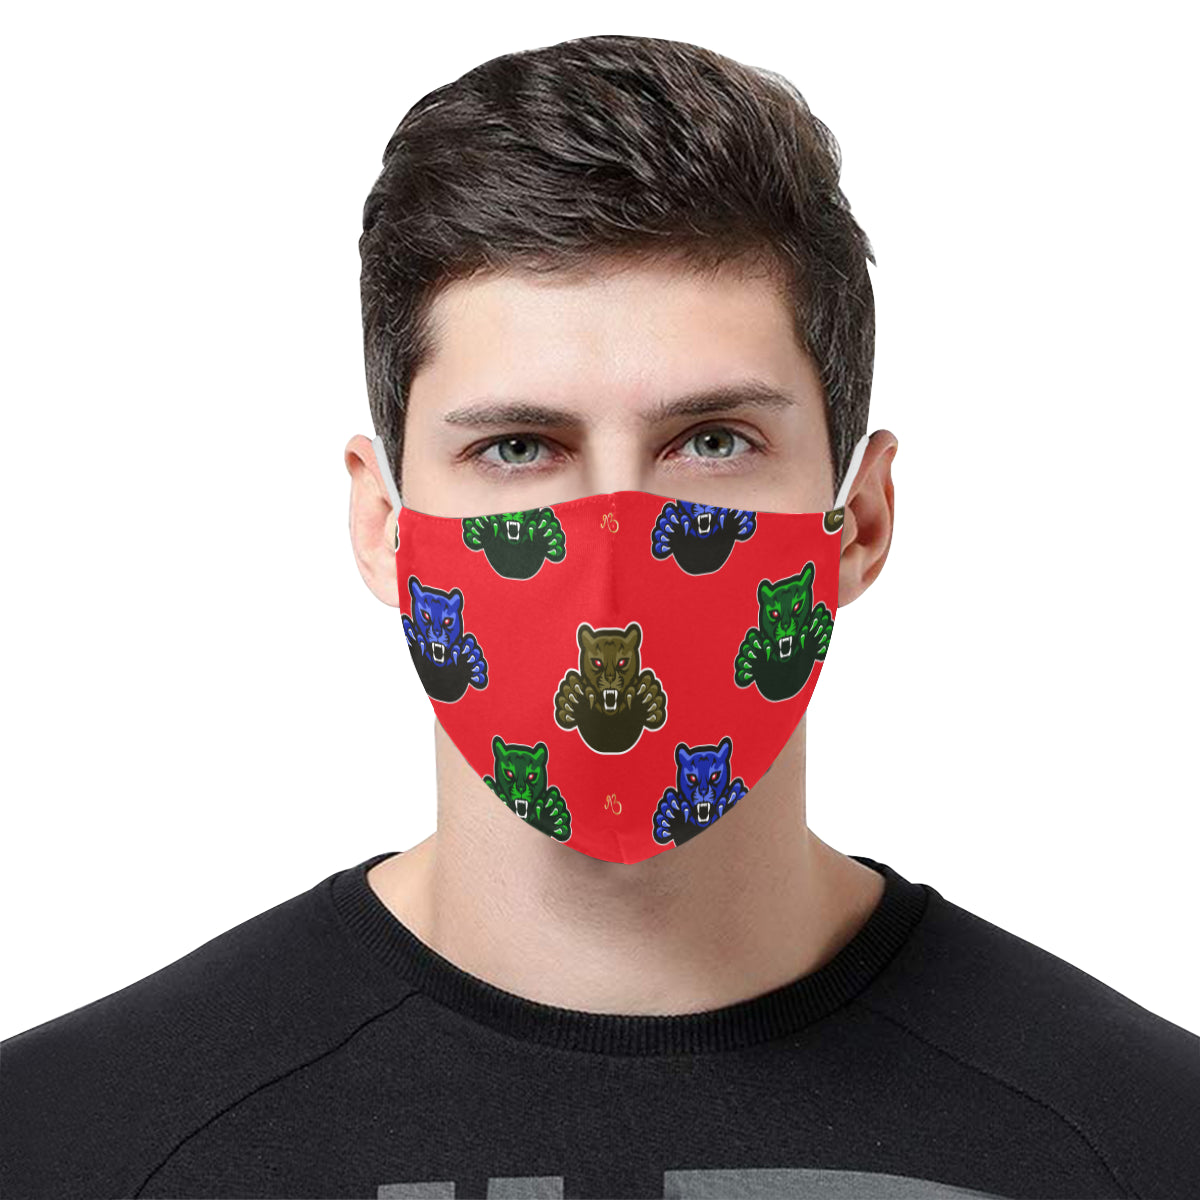 Bear Claw Print Cotton Fabric Face Mask with Filter Slot & Adjustable Strap (Pack of 5) - Non-medical use